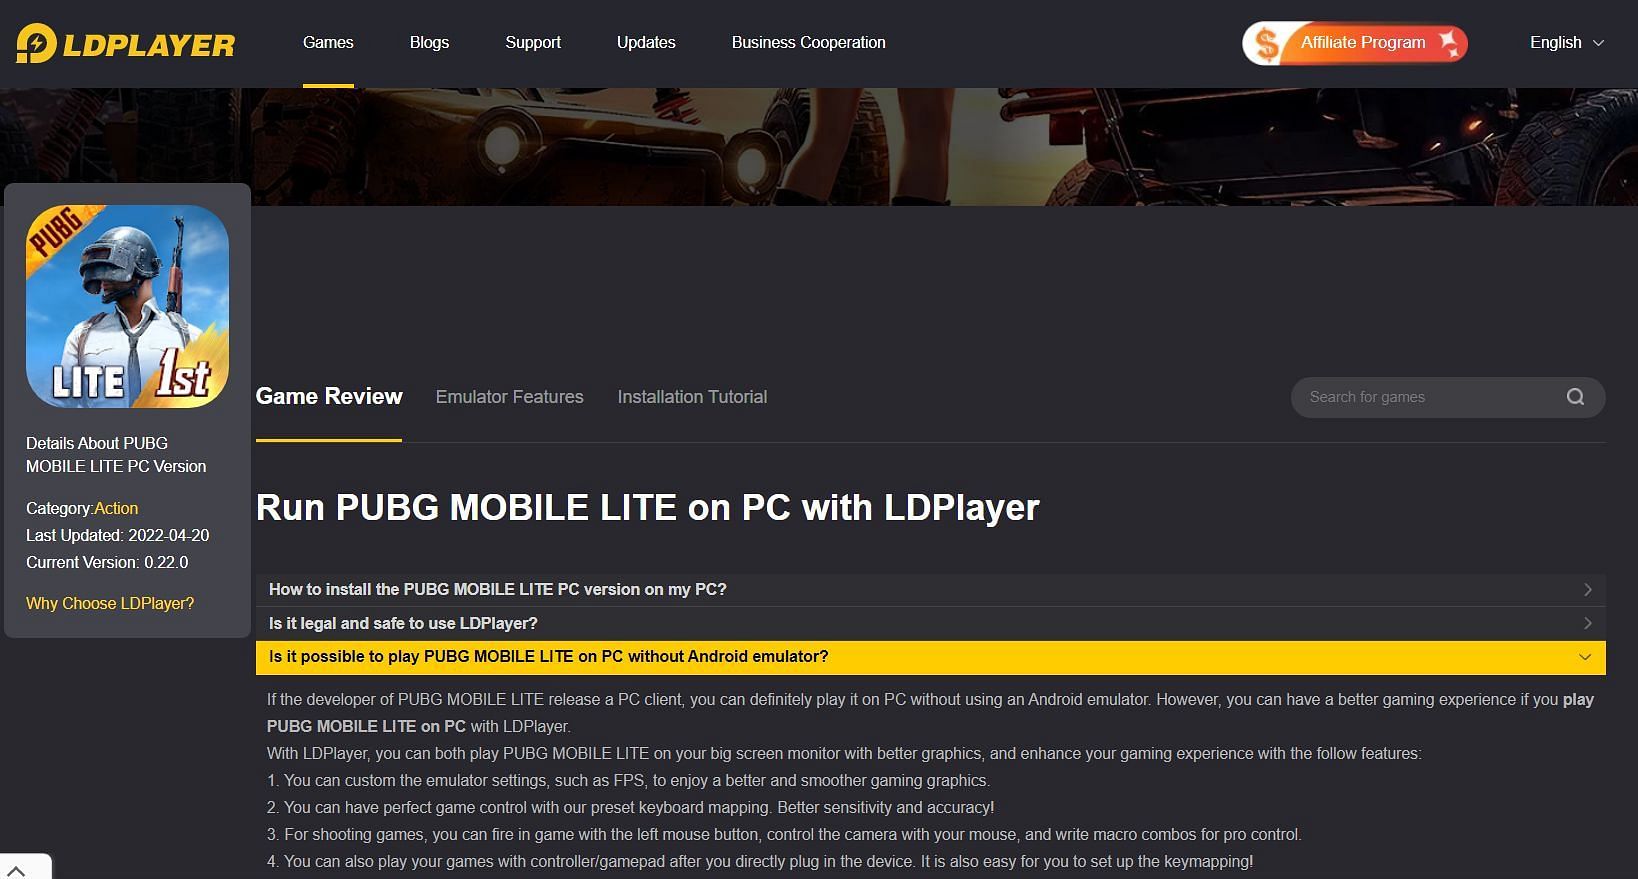 LDPlayer offers multiple customizable features for a better gaming experience (Image via LDPlayer)